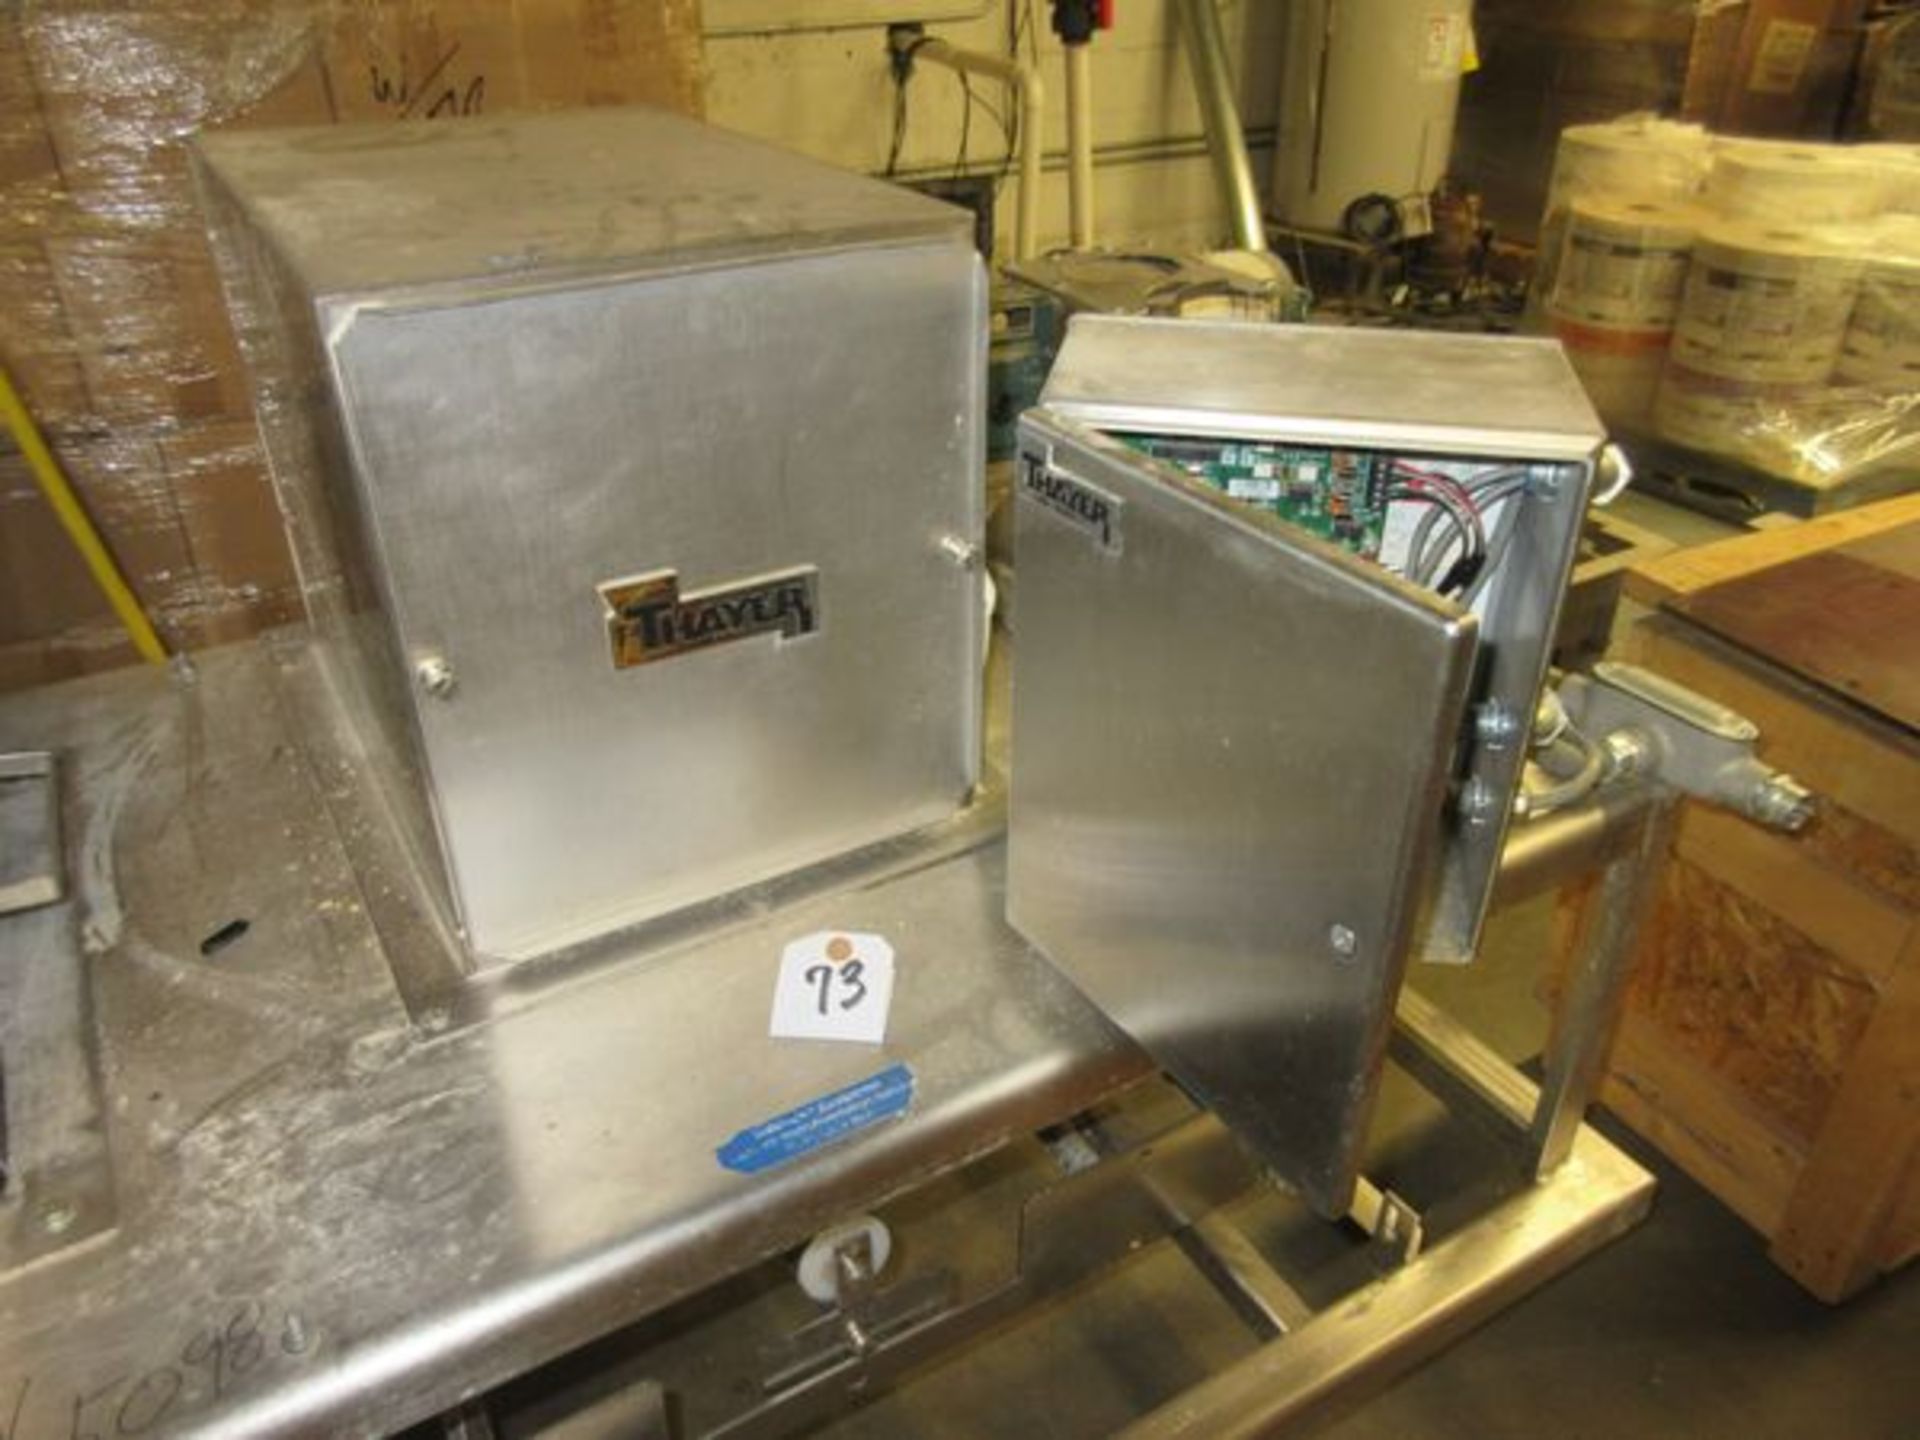 Thayer Stainless Steel Weight Belt Feeder Series 5200 Mixing Station (Site Tag #73) | Rig Fee $25 - Image 3 of 8